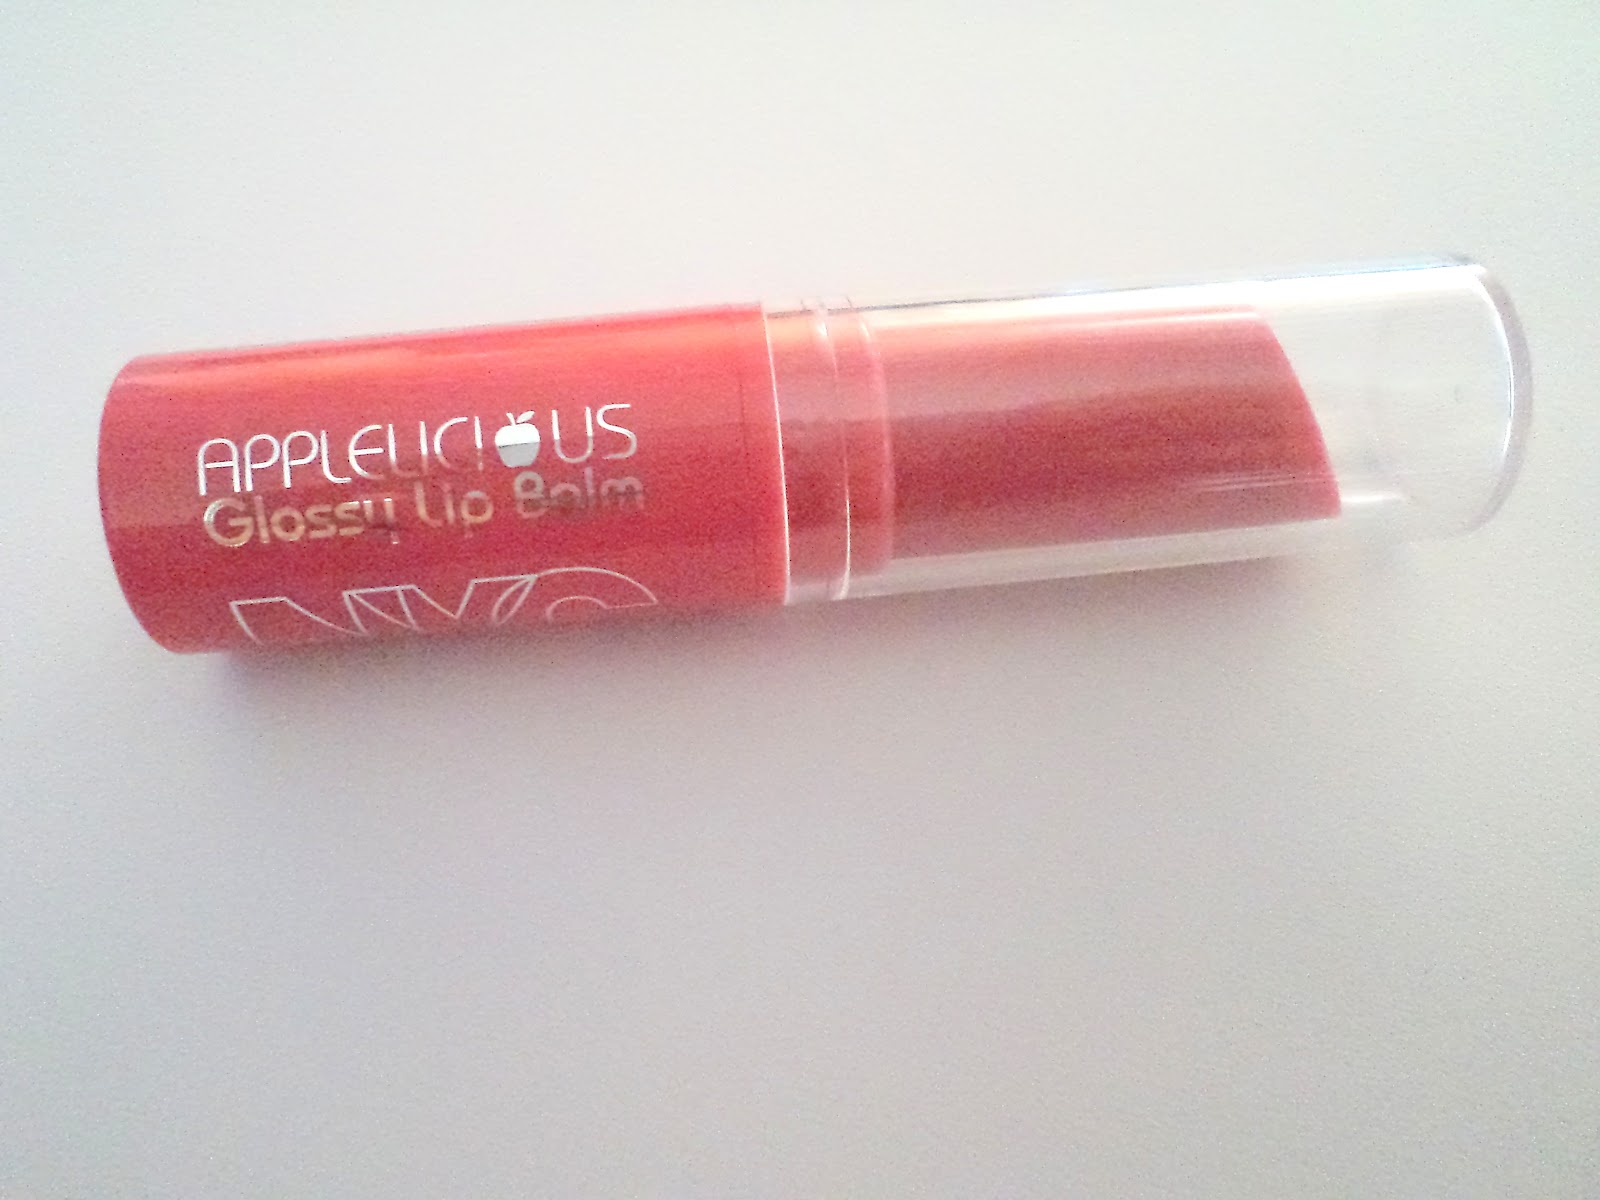 NYC Applelicious Glossy Lip Balm Review | Truth About Cosmetics